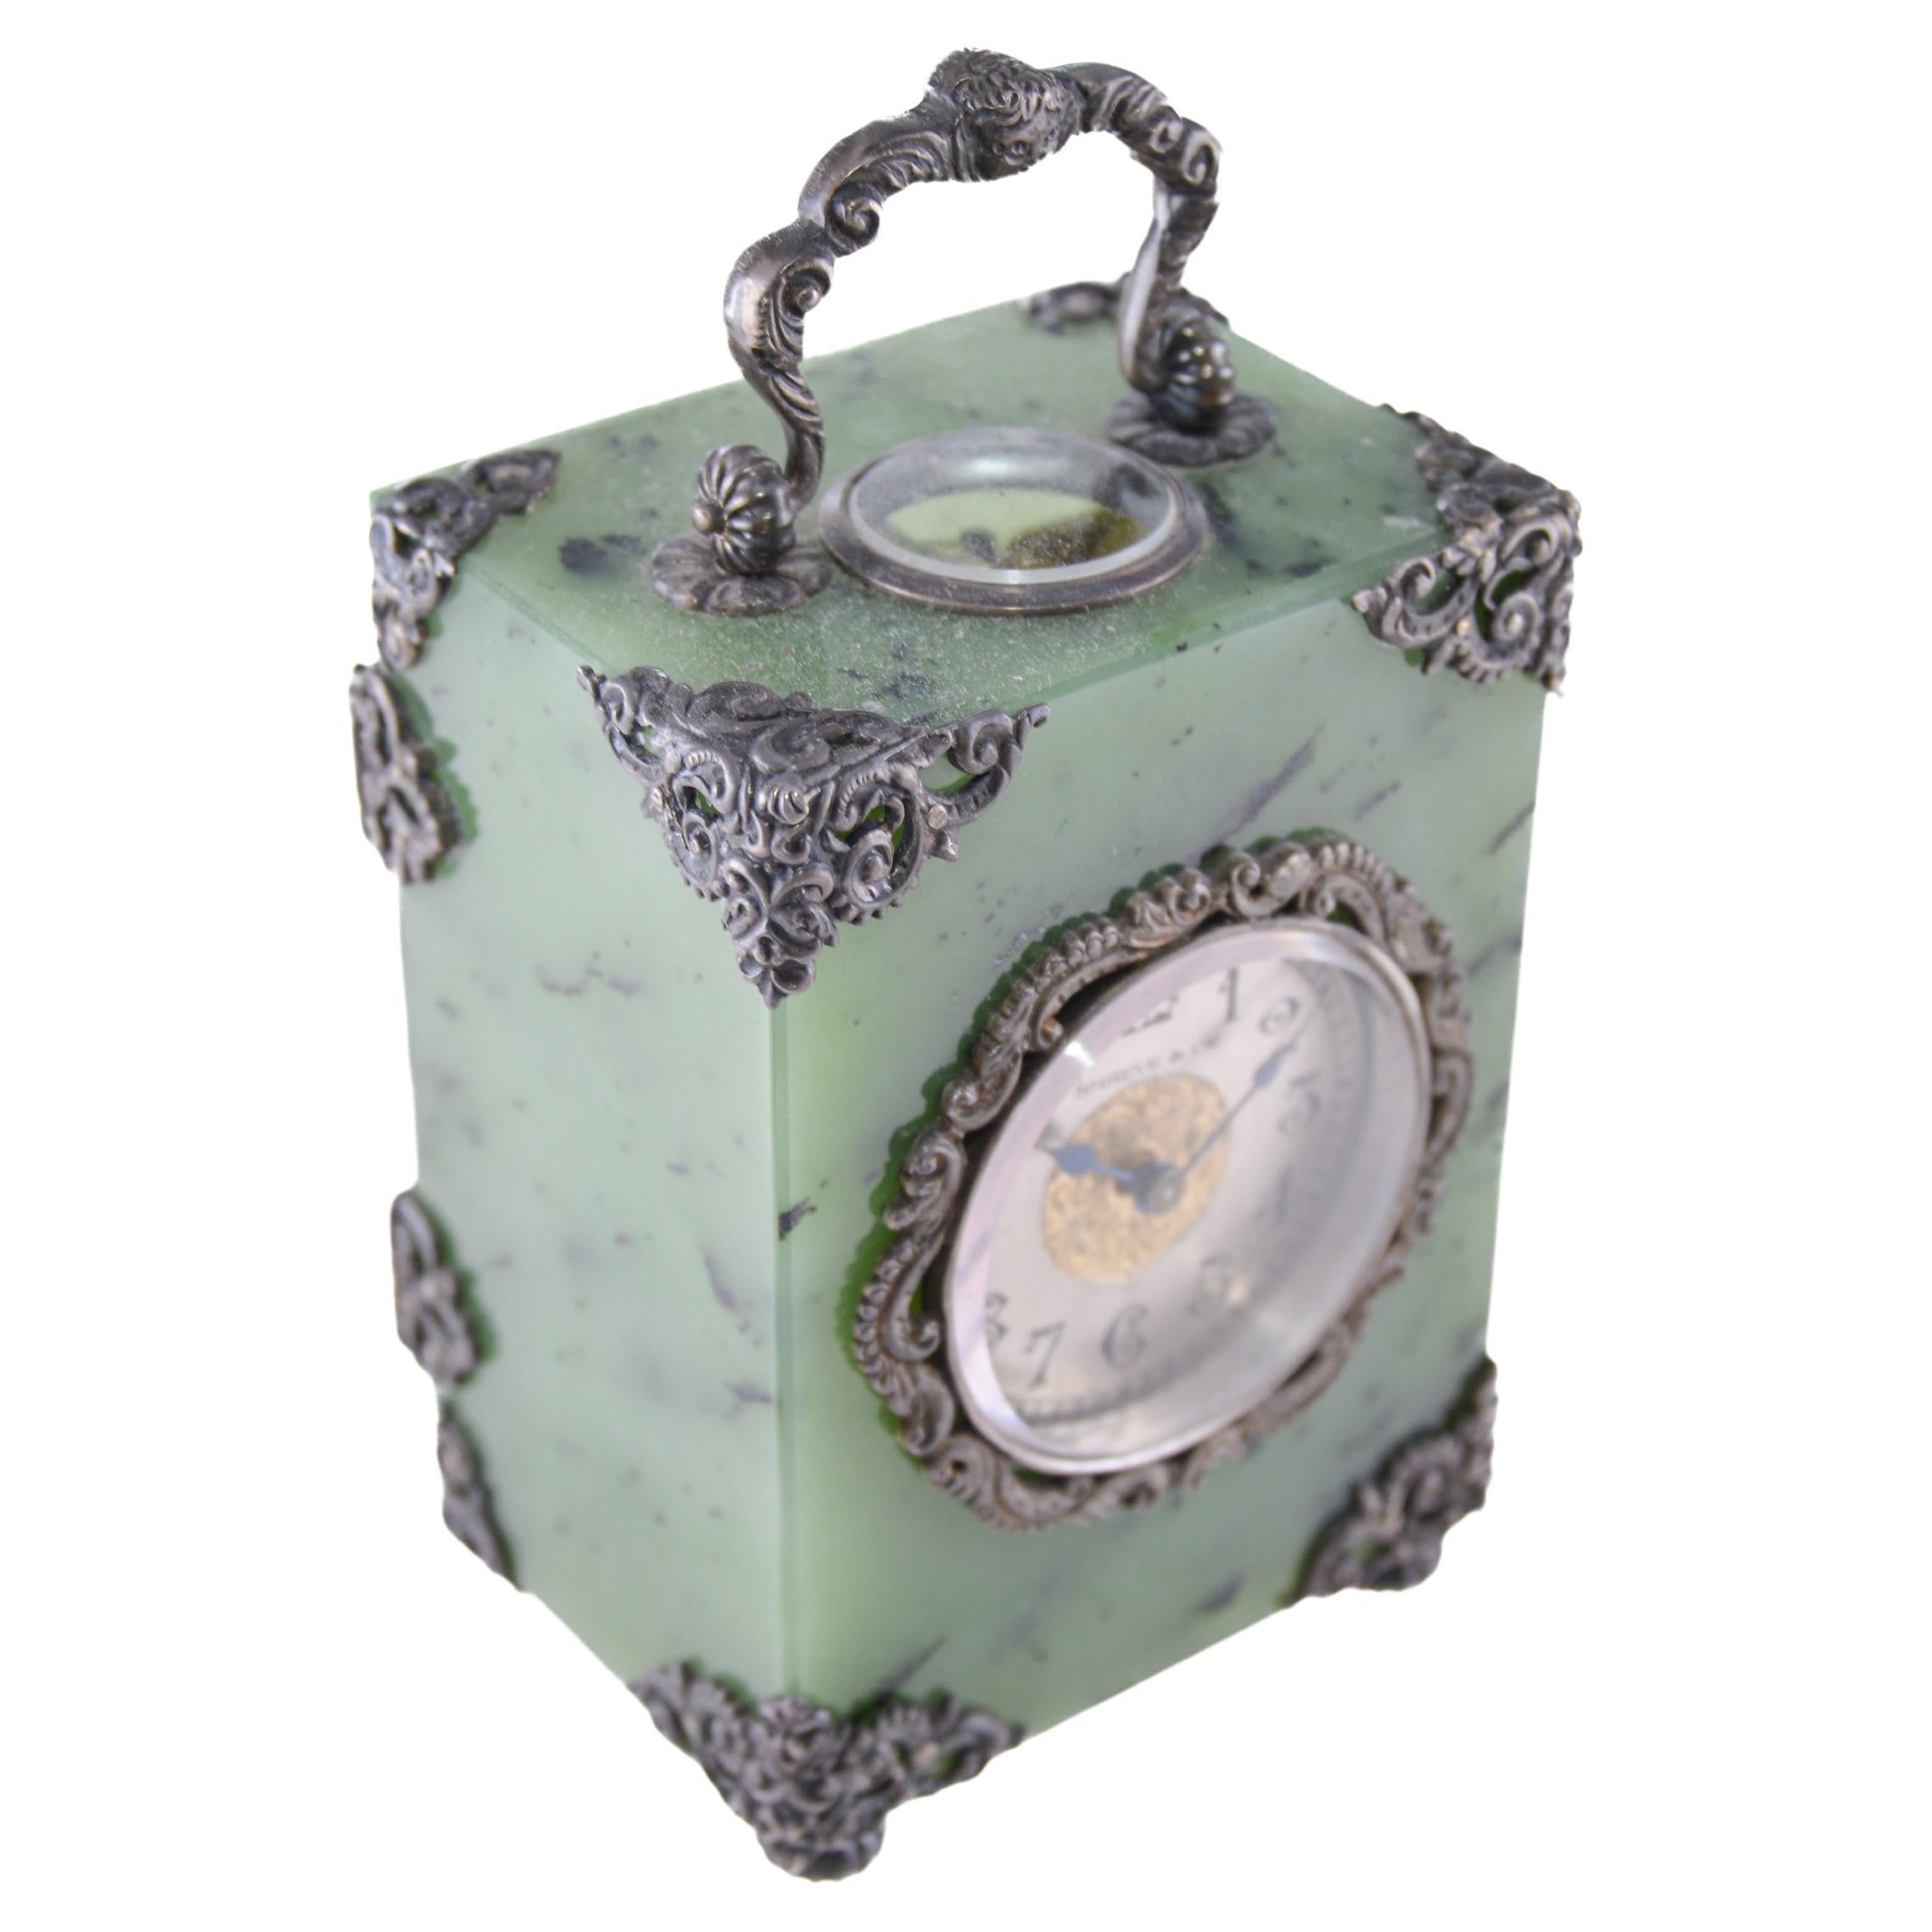 Shreve & Co Jade Carriage Clock with Exposed Escapement Sterling Hardware 1915 4